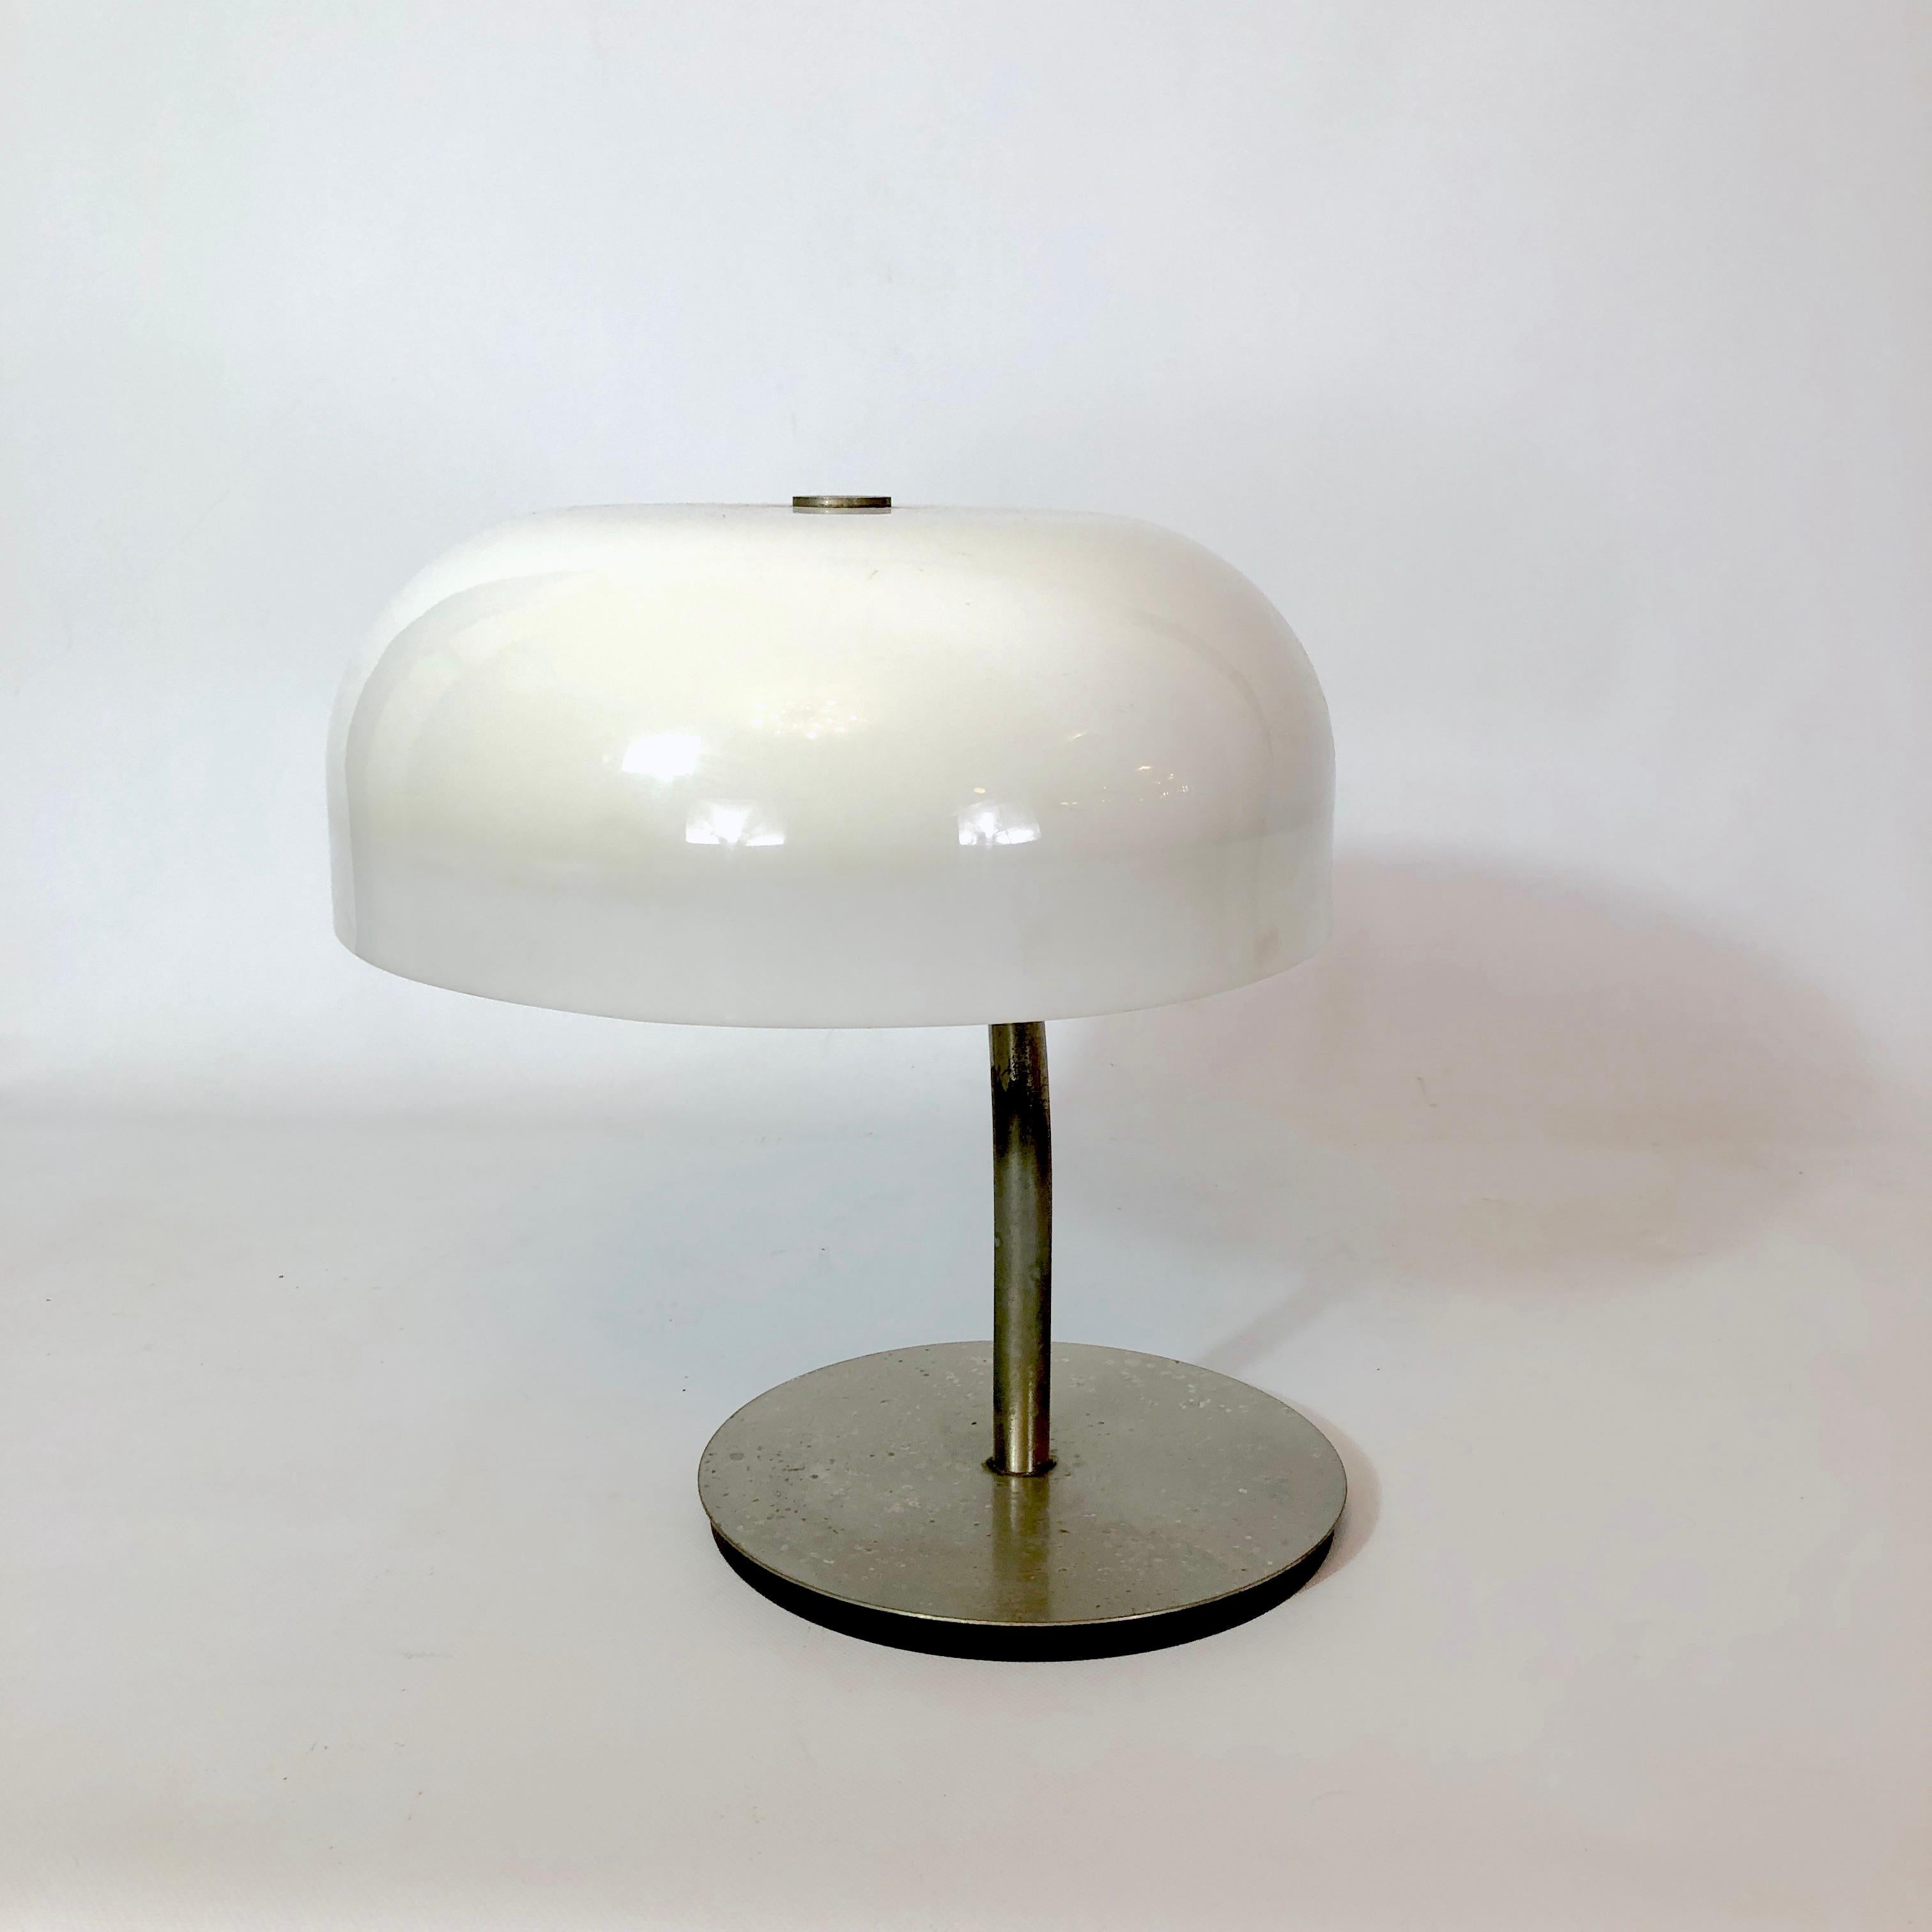 Good vintage condition with trace of age and use on the nicheled metal for this Italian adjustable table lamp designed by Giotto Stoppino for Valenti Luce. Made from metal frame and plastic. Full working with EU standard, adaptable on demand for USA